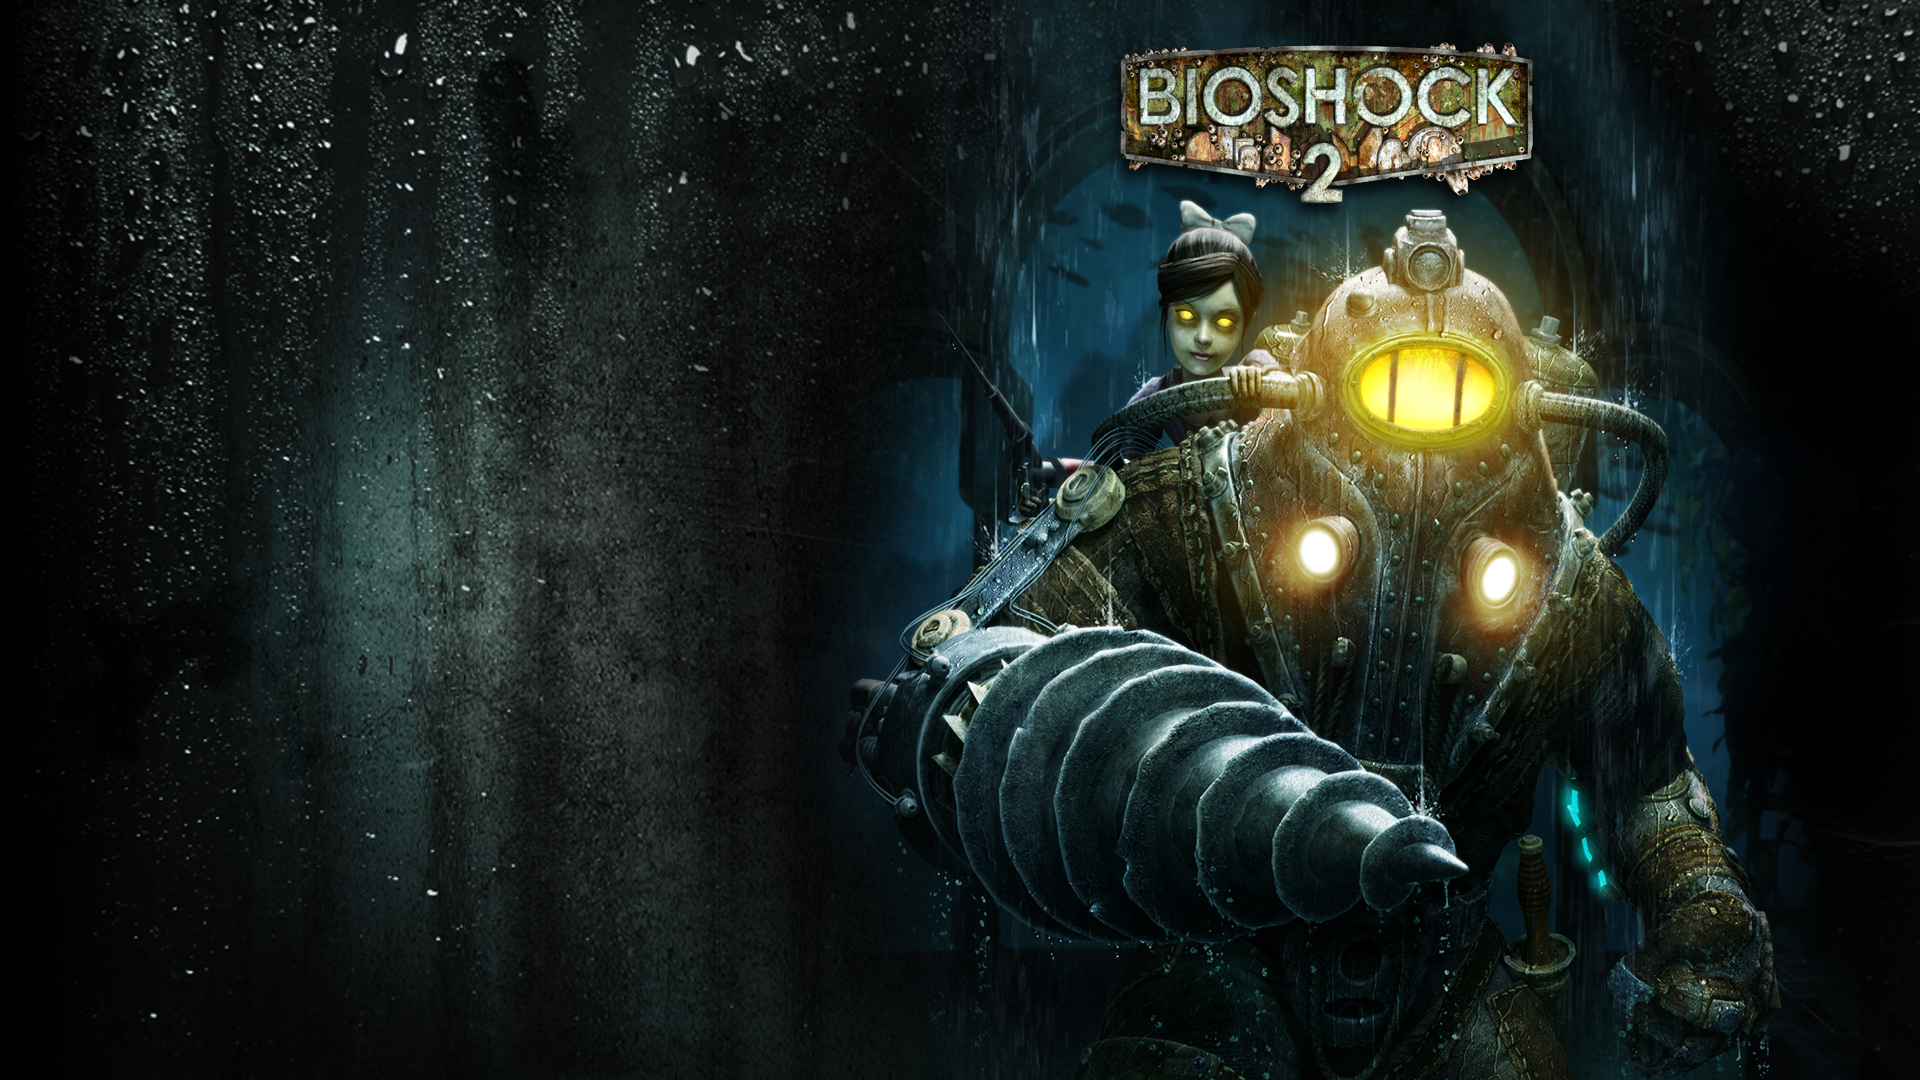 Bioshock Temporary Unavailable On All Digital Channels